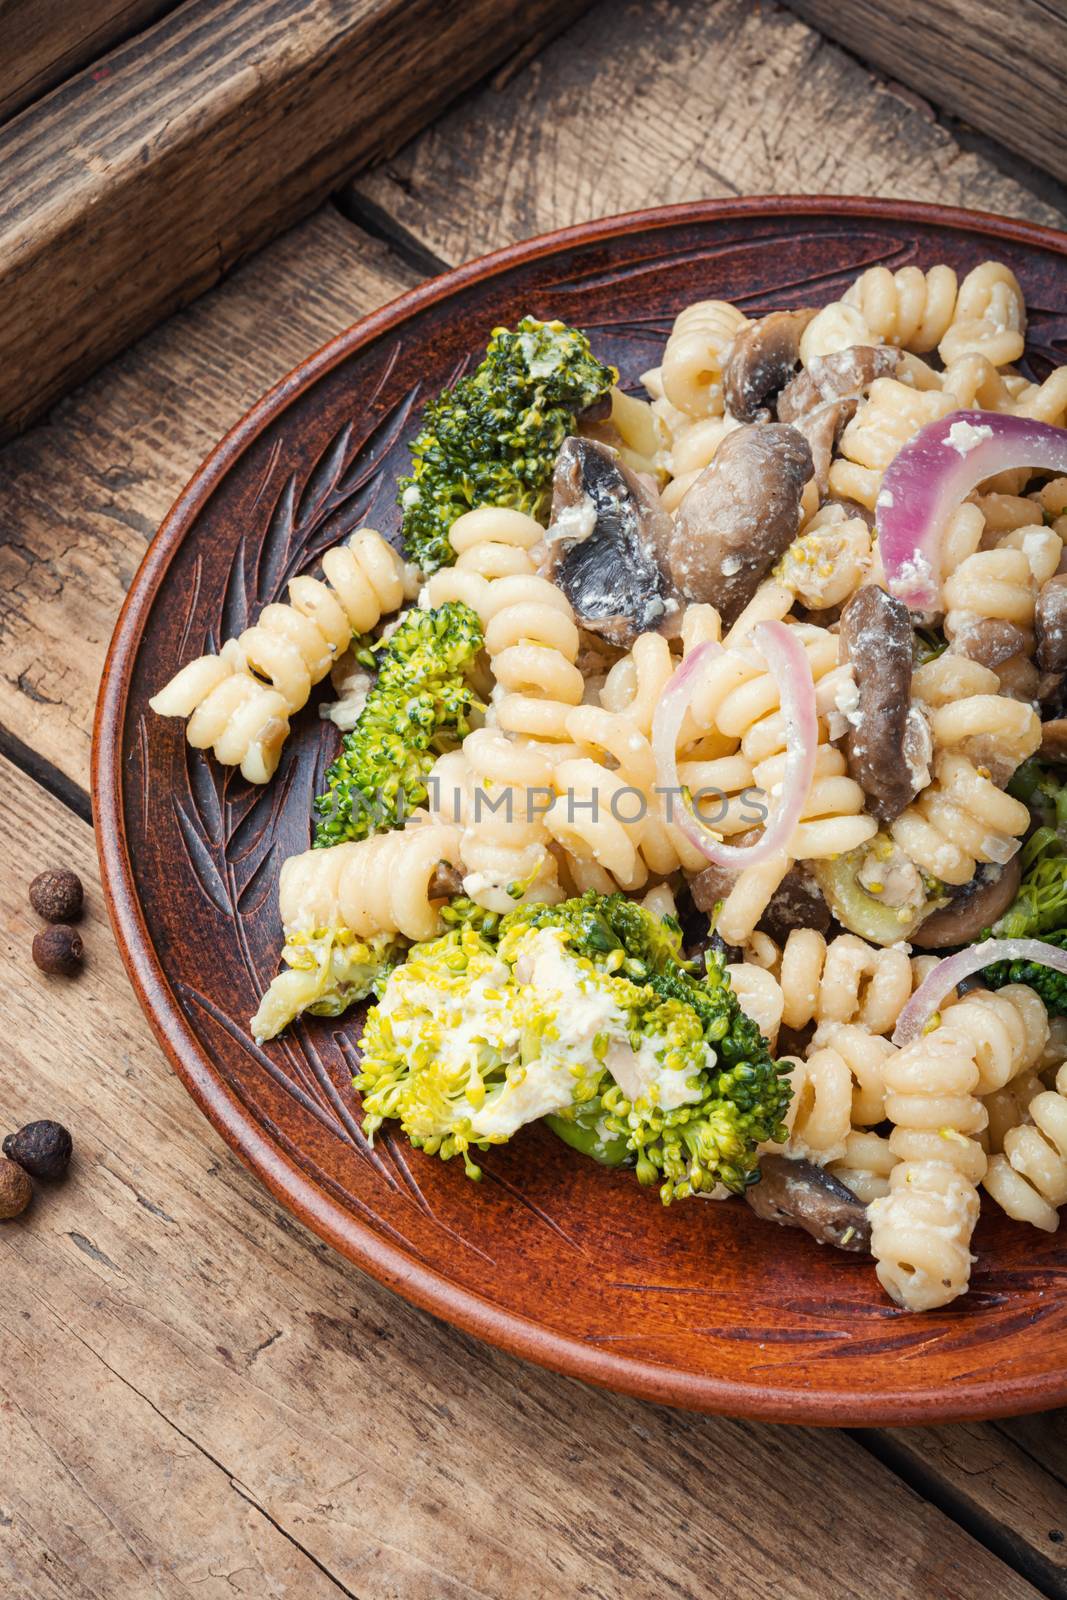 Baked broccoli and pasta with mushrooms.Vegetarian vegetable pasta wooden table.